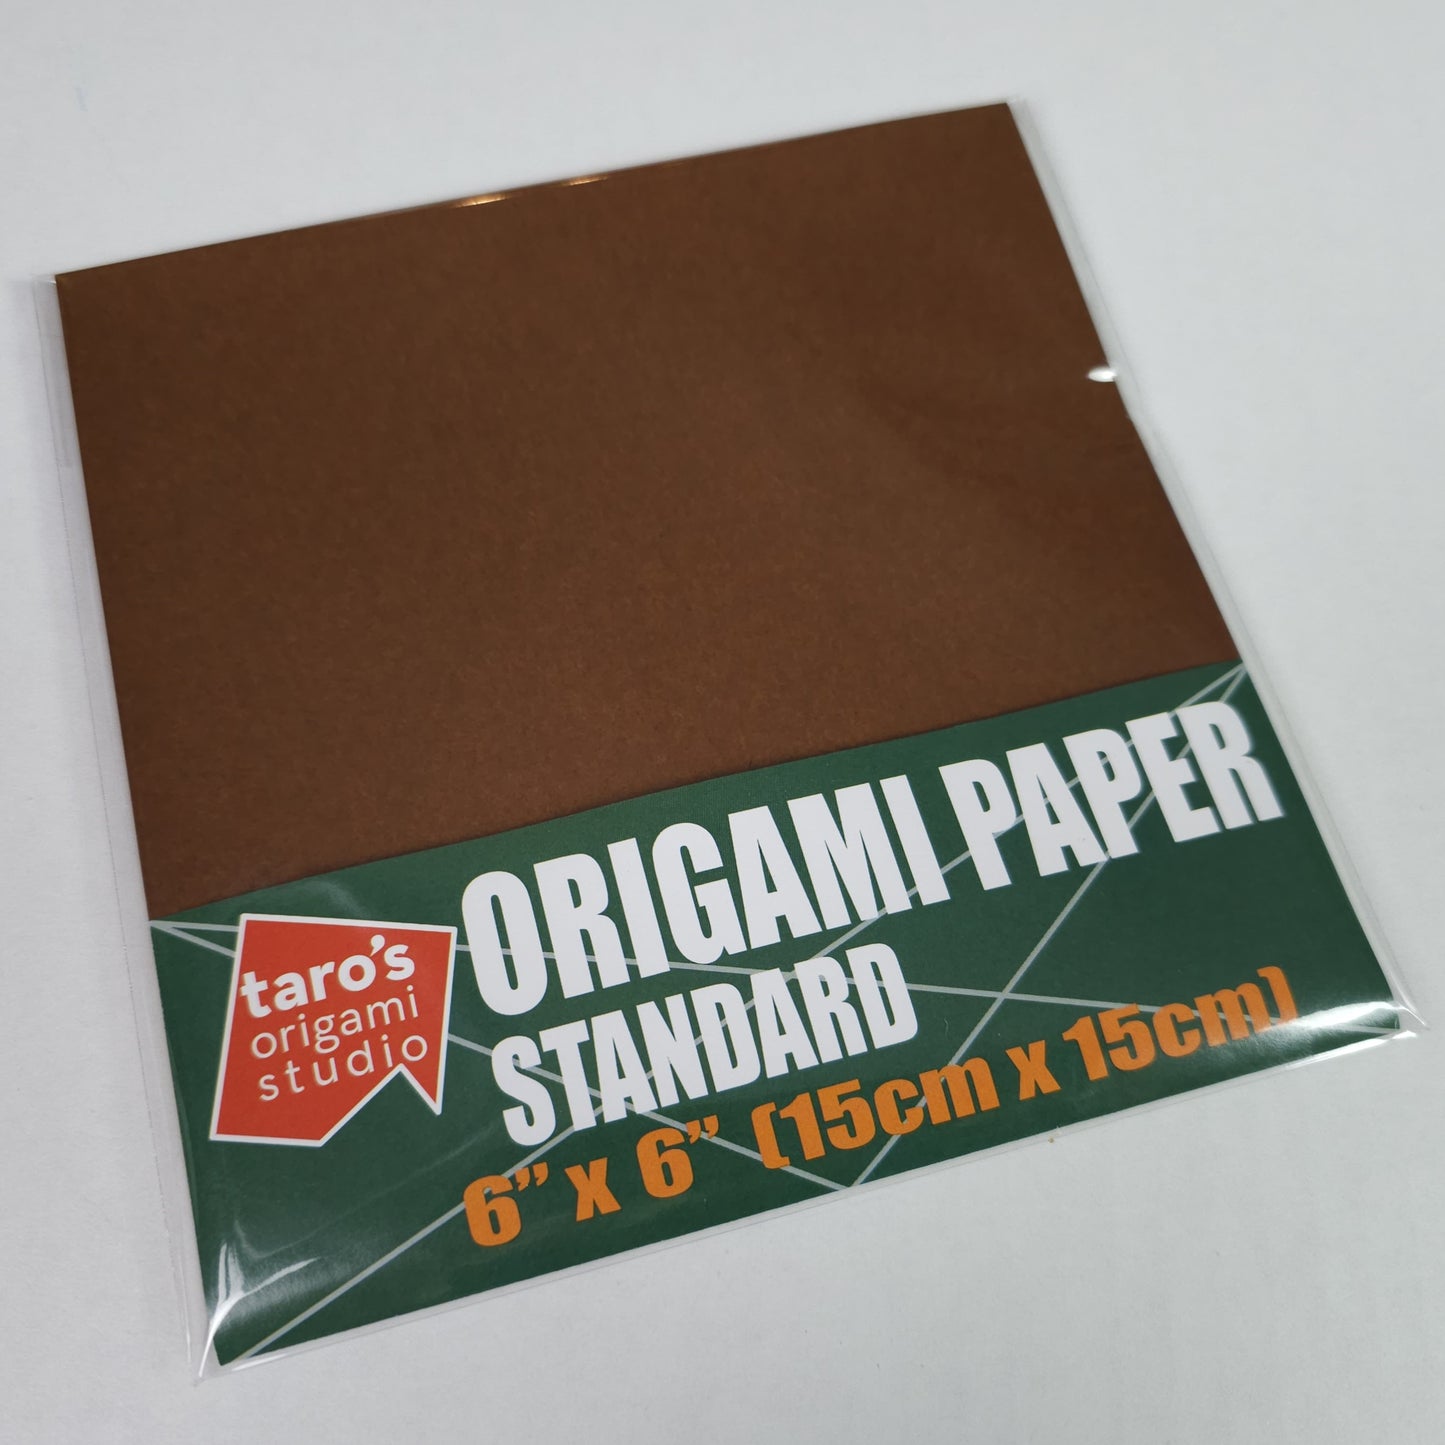 Standard 6 Inch One Sided Single Color (Dark Brown) 50 Sheets (All Same Color) Square Easy Fold Premium Japanese Paper for Beginner (Made in Japan)